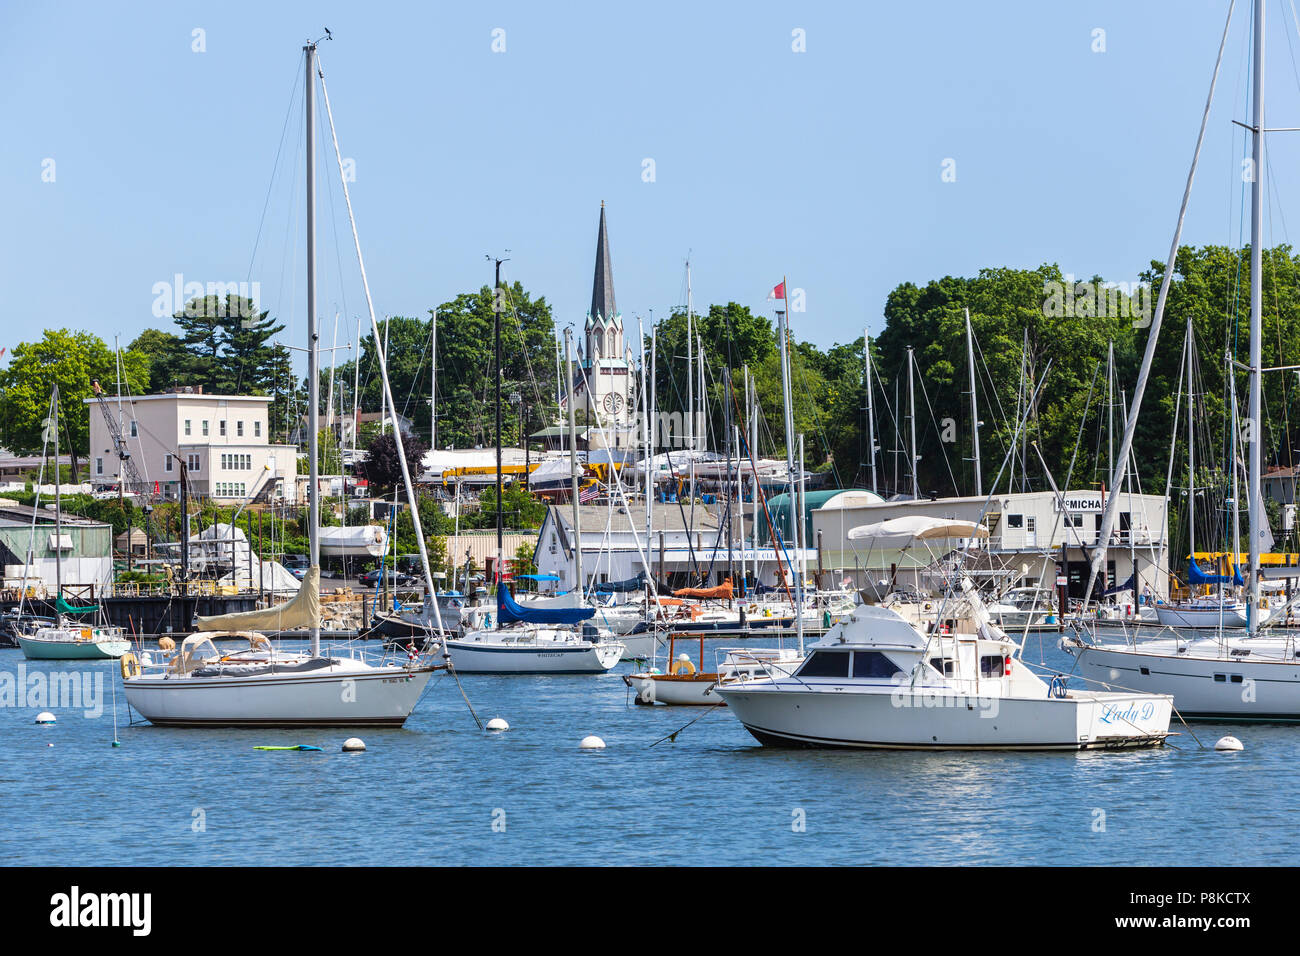 Sailboats and other pleasure craft moored in the East Basin of Mamaroneck Harbor in Harbor Island Park, Mamaroneck, New York. Stock Photo